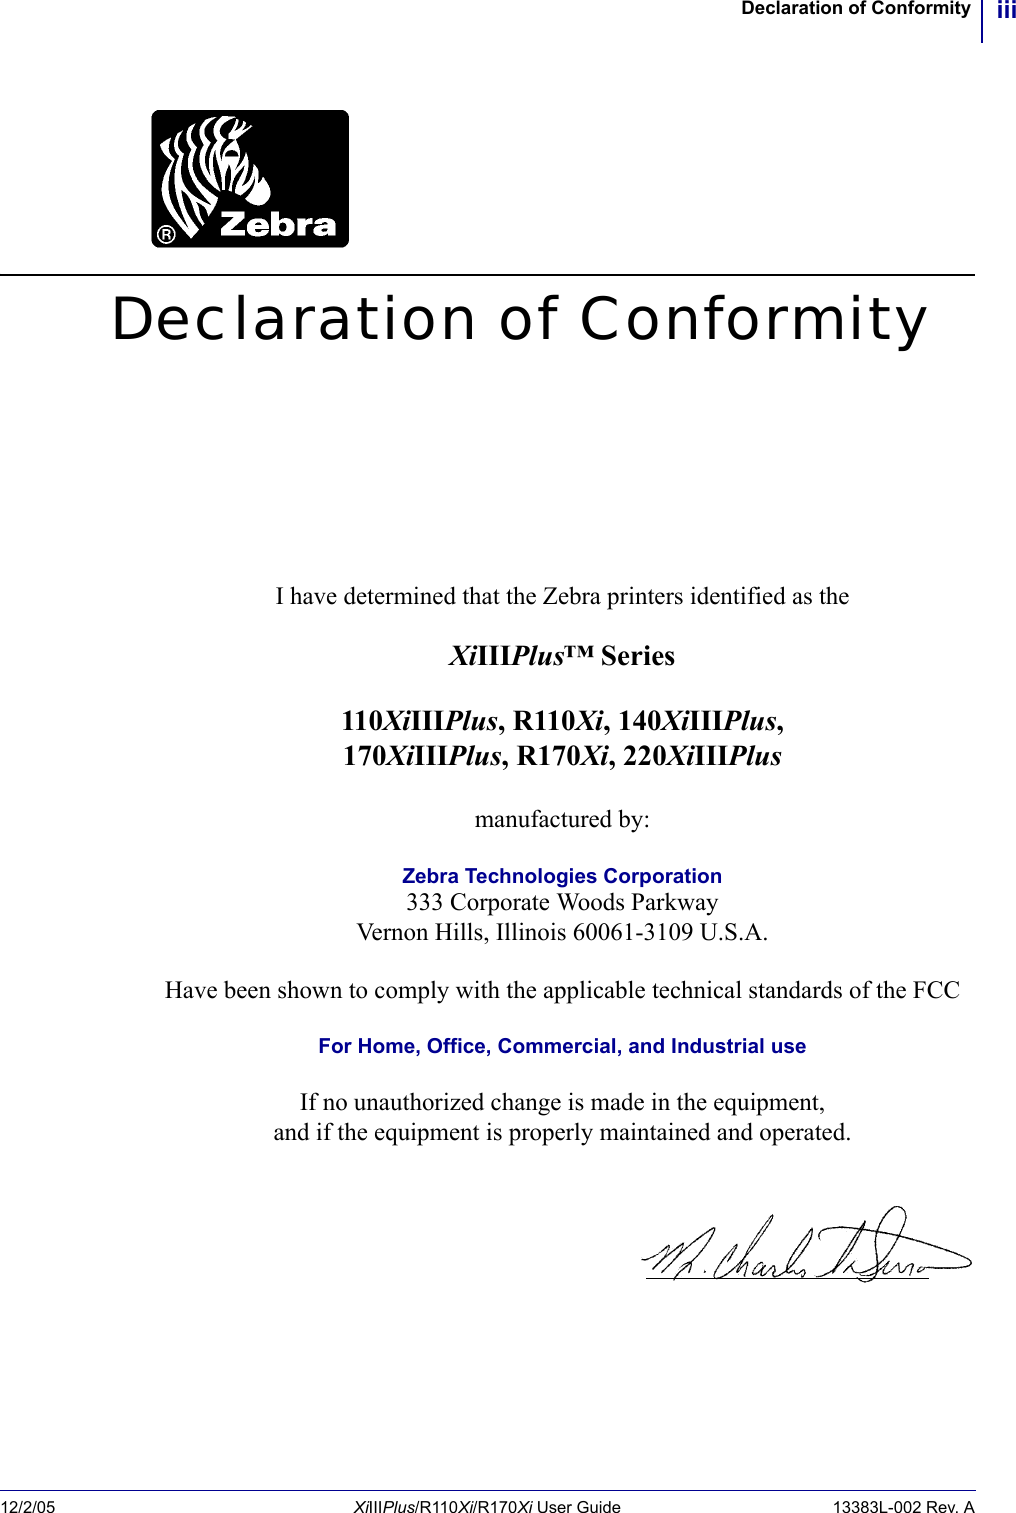 iiiDeclaration of Conformity12/2/05 XiIIIPlus/R110Xi/R170Xi User Guide 13383L-002 Rev. ADeclaration of ConformityI have determined that the Zebra printers identified as theXiIIIPlus™ Series110XiIIIPlus, R110Xi, 140XiIIIPlus,170XiIIIPlus, R170Xi, 220XiIIIPlusmanufactured by:Zebra Technologies Corporation333 Corporate Woods ParkwayVernon Hills, Illinois 60061-3109 U.S.A.Have been shown to comply with the applicable technical standards of the FCCFor Home, Office, Commercial, and Industrial useIf no unauthorized change is made in the equipment,and if the equipment is properly maintained and operated.